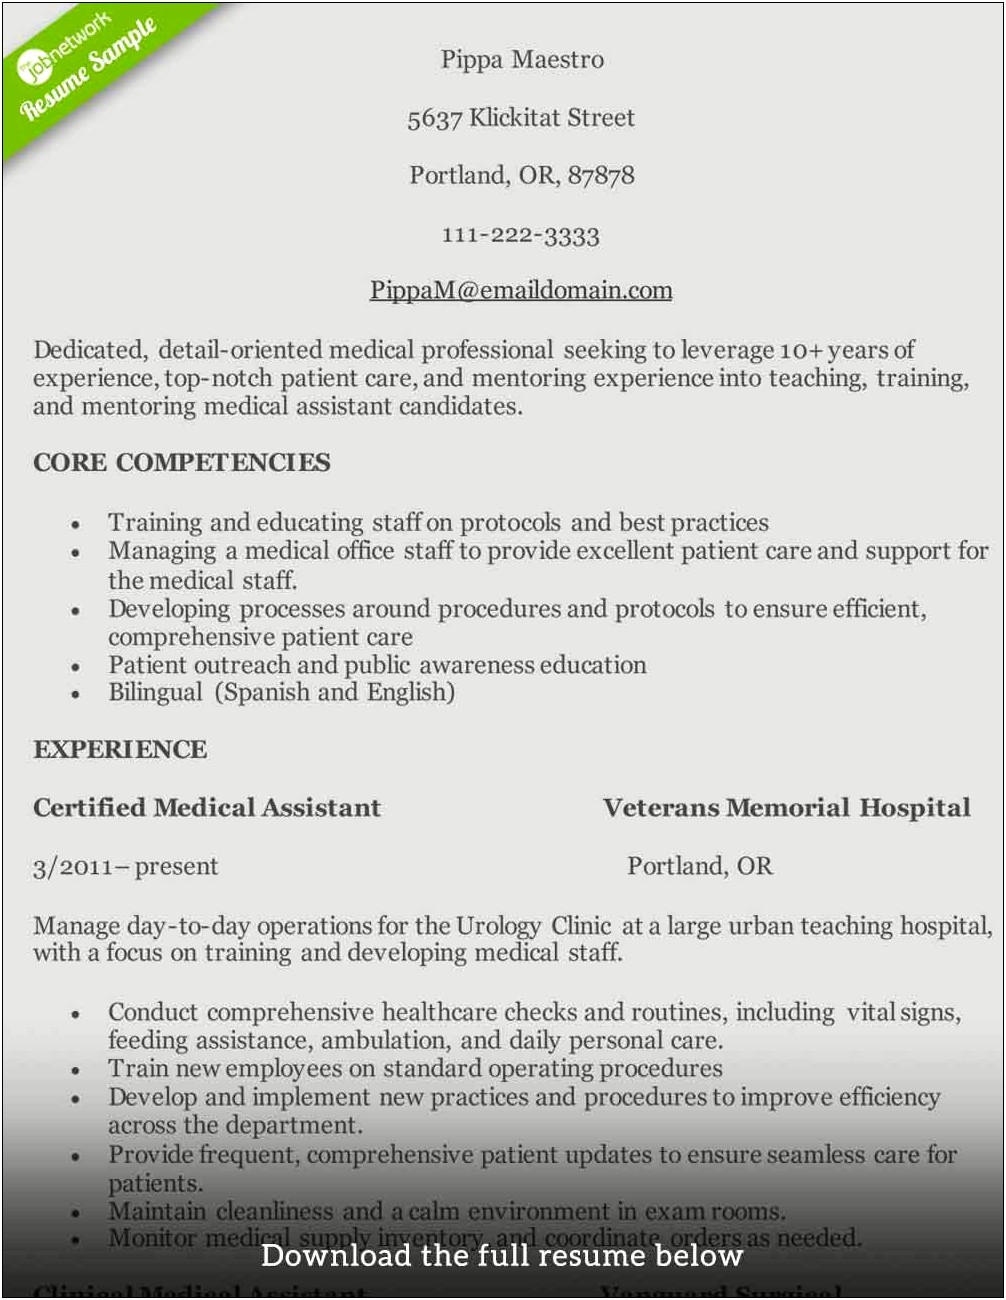 Resume Objective For Prospective Physician Assistant